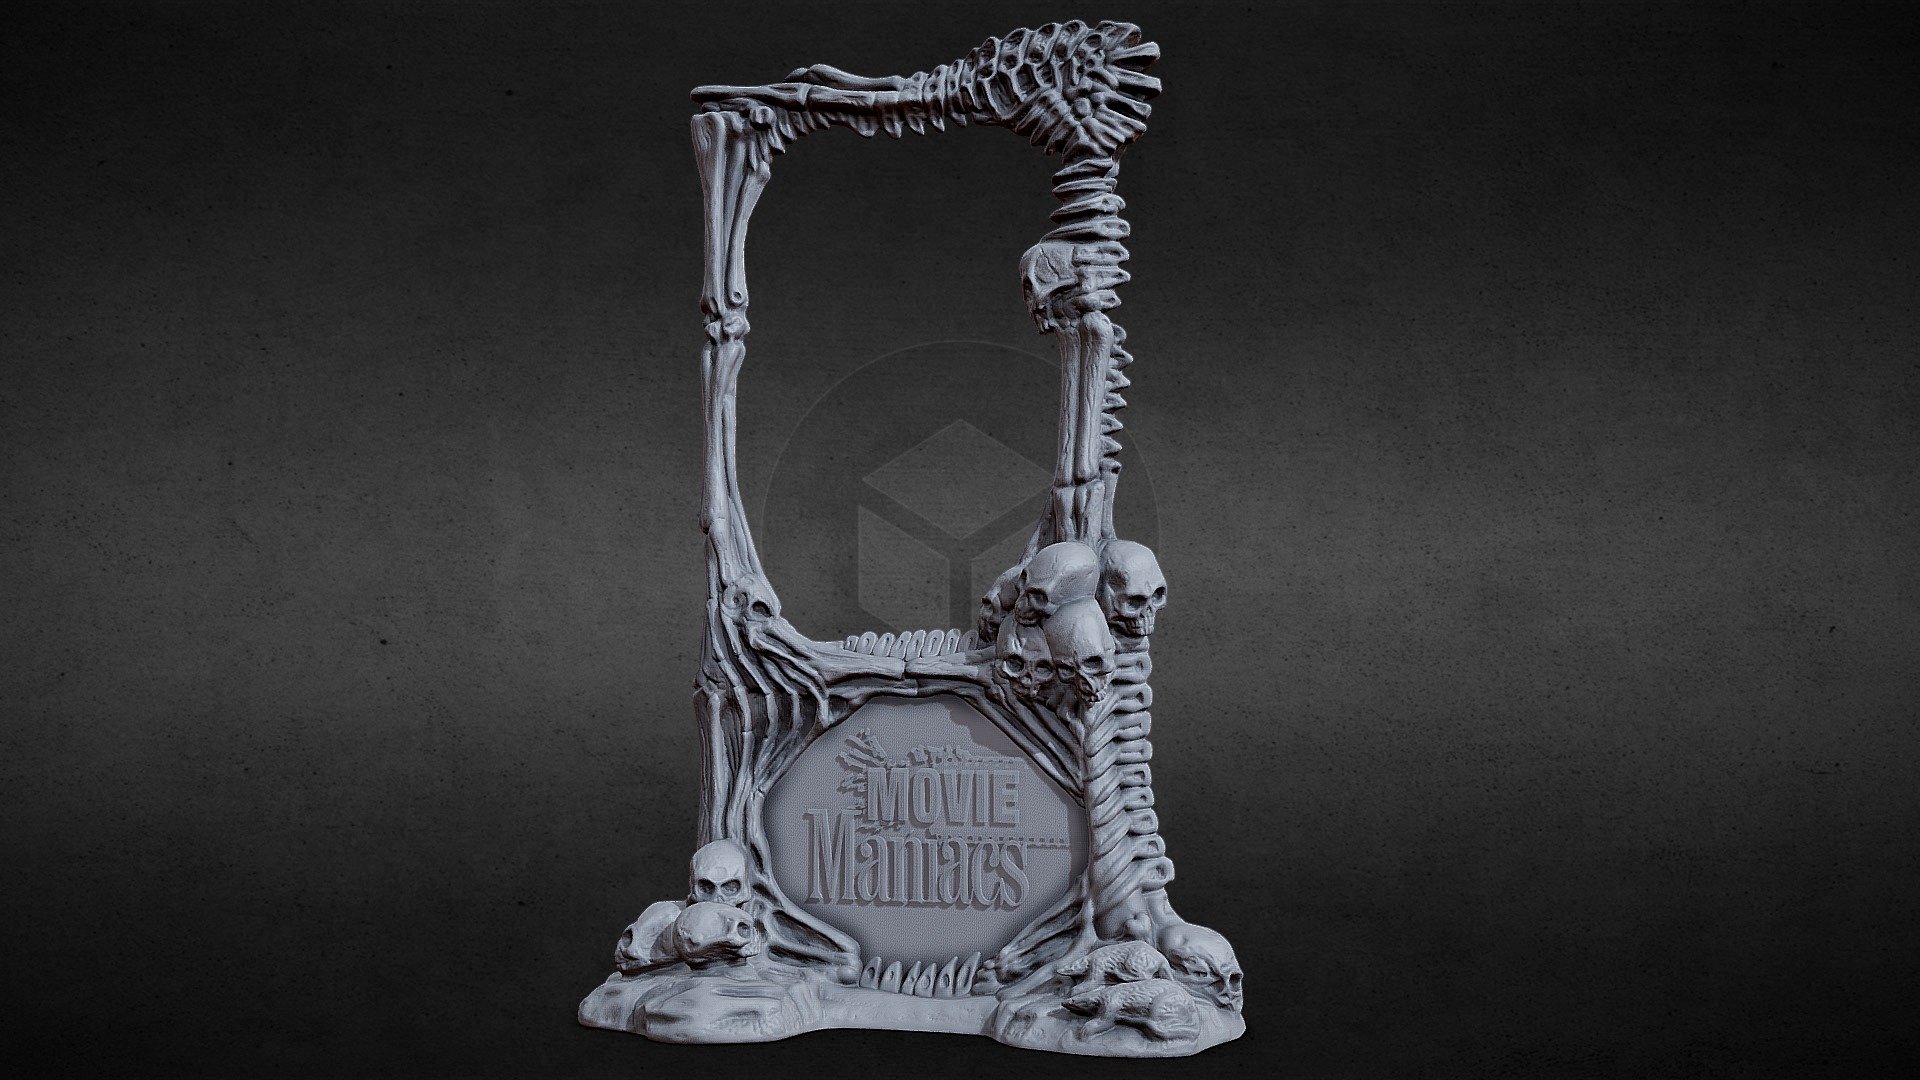 This is a 3D Printable model of McFarlane Toys Movie Maniacs series 1 to 3 poster stand.

PLEASE NOTE: The cadboard poster you put on the back side will need to be glued to the stand or secured in another way of your preference.





The original accesory is 20 centimeters long (7.87 inches)




Watertight 3d model ready for 3d printing.




No hollowed. 




No supports provided.




1 piece.




Continuous surface.




STL and OBJ models.




Highly detailed polygonal model.


 - 3D PRINTABLE MOVIE MANIACS SERIES 1 POSTER STAND - Buy Royalty Free 3D model by Ratboy3D 3d model